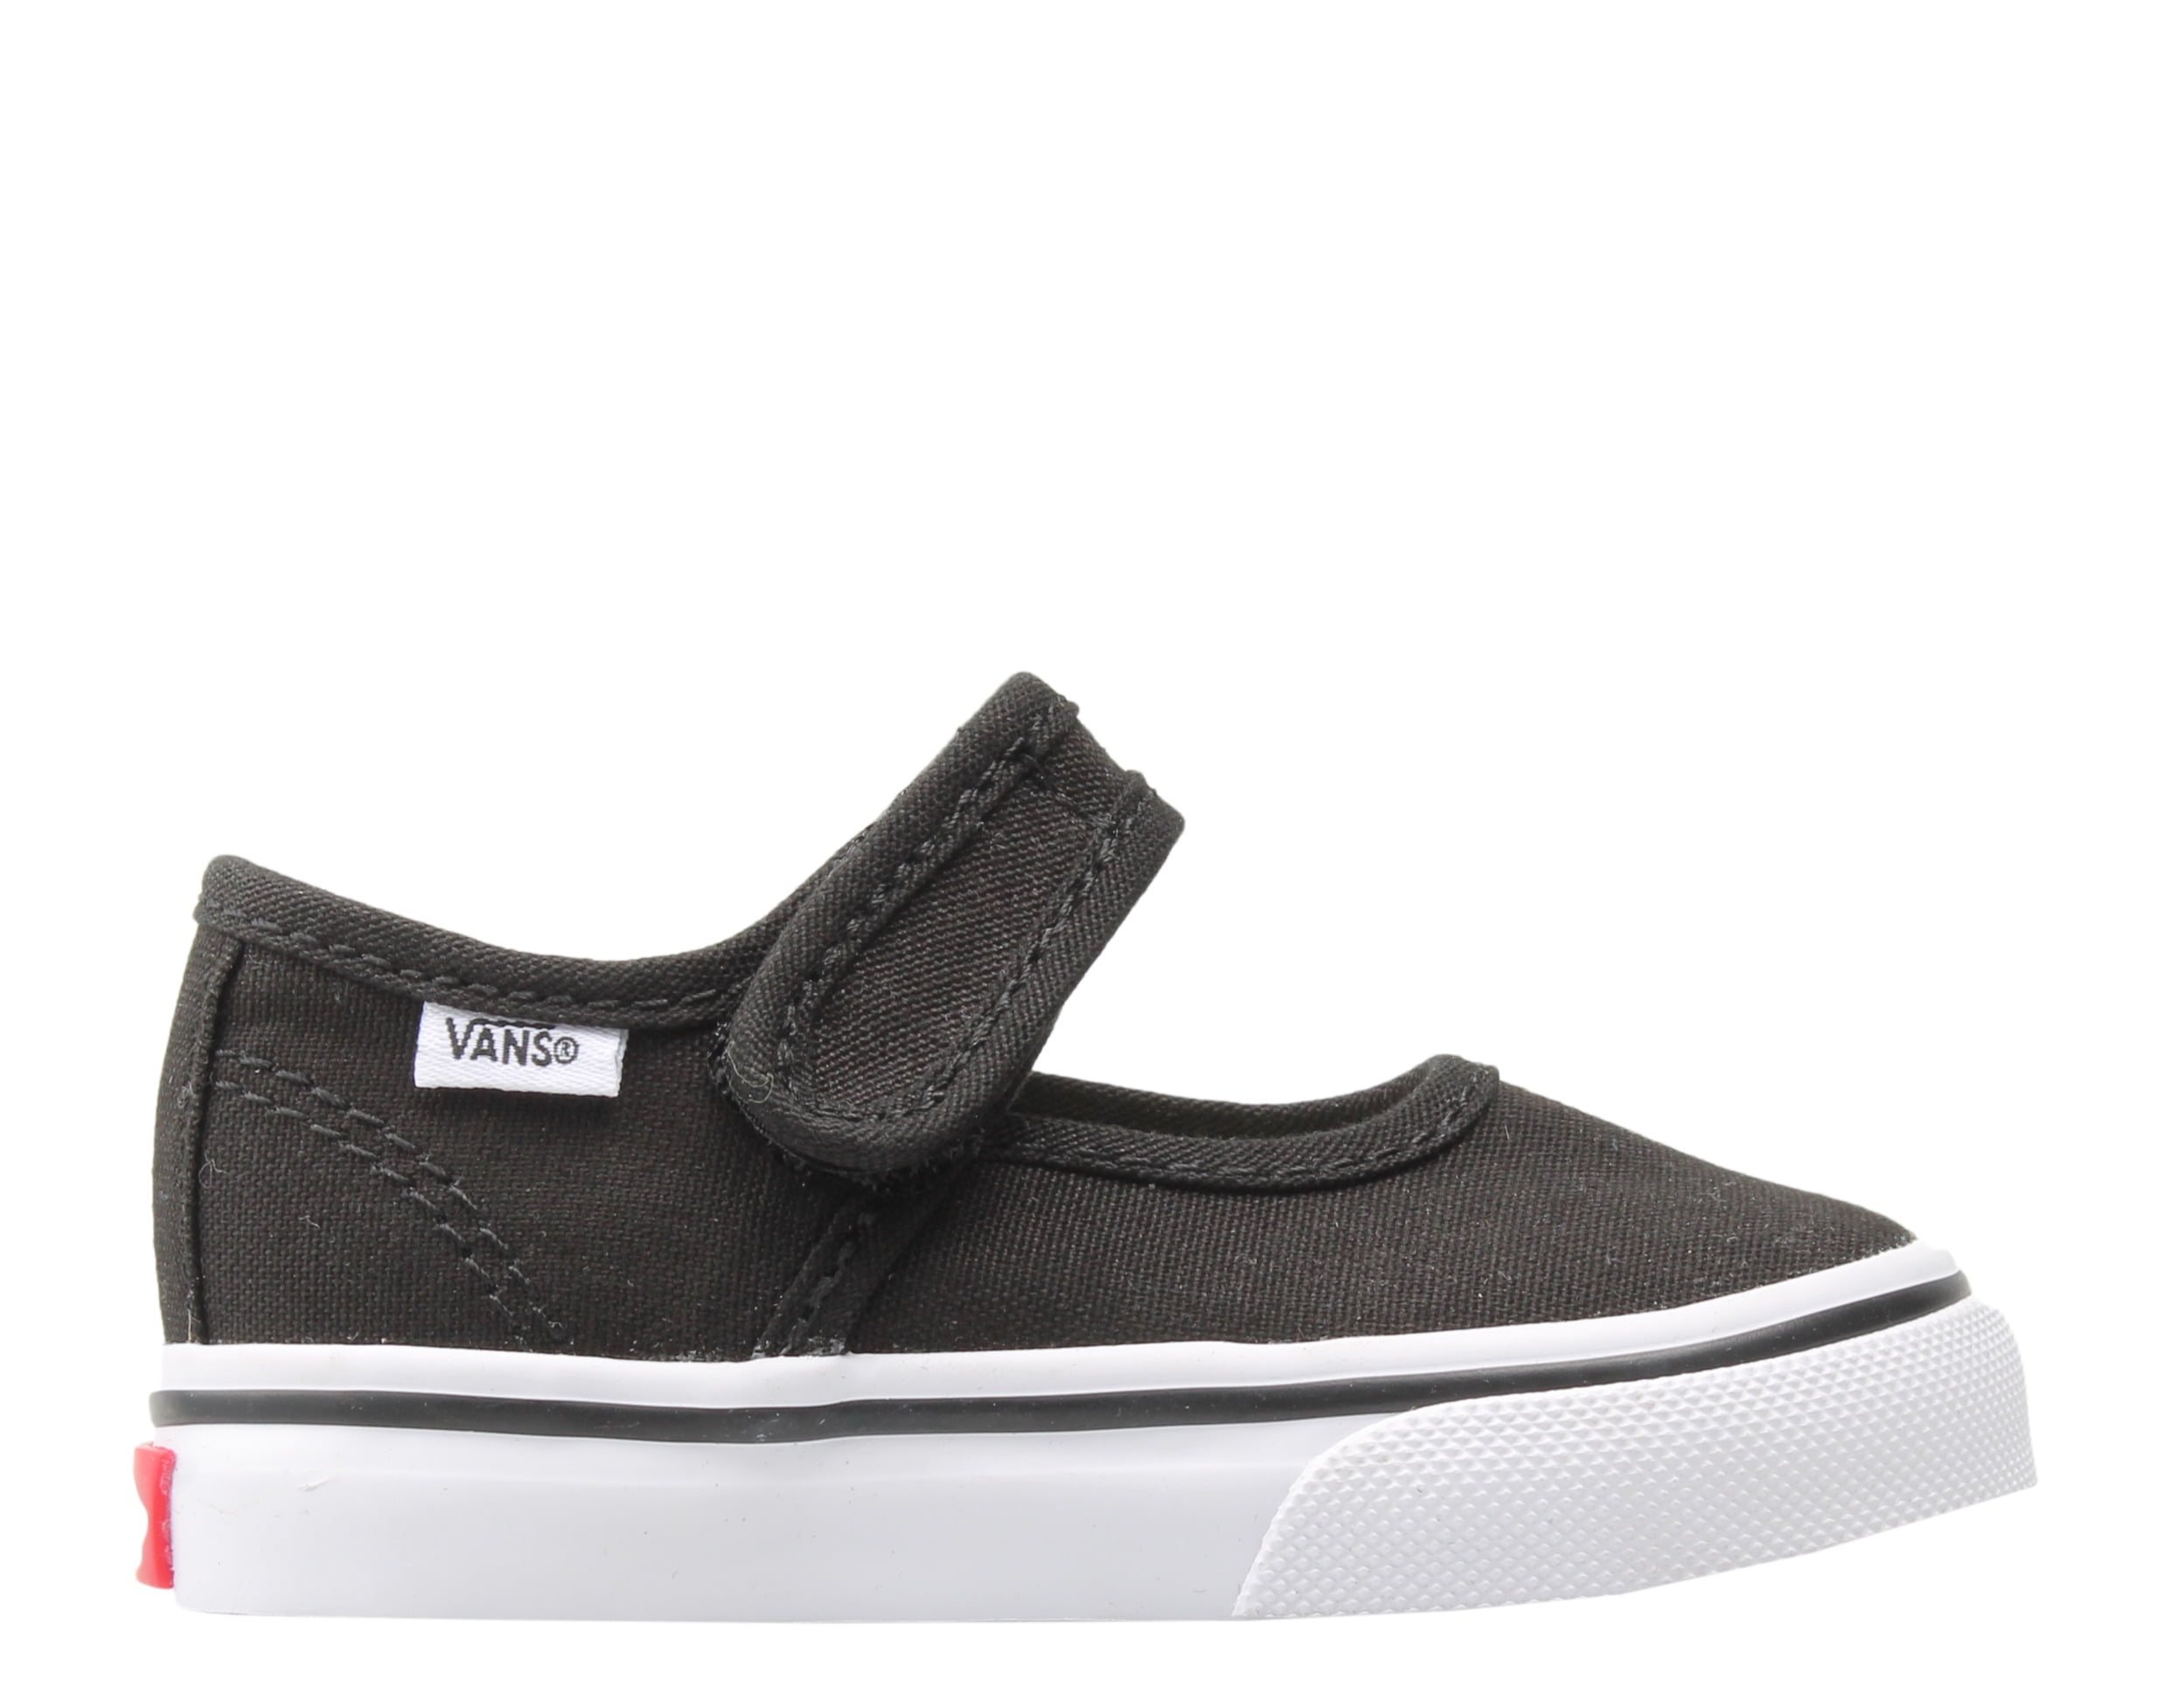 vans toddler mary janes